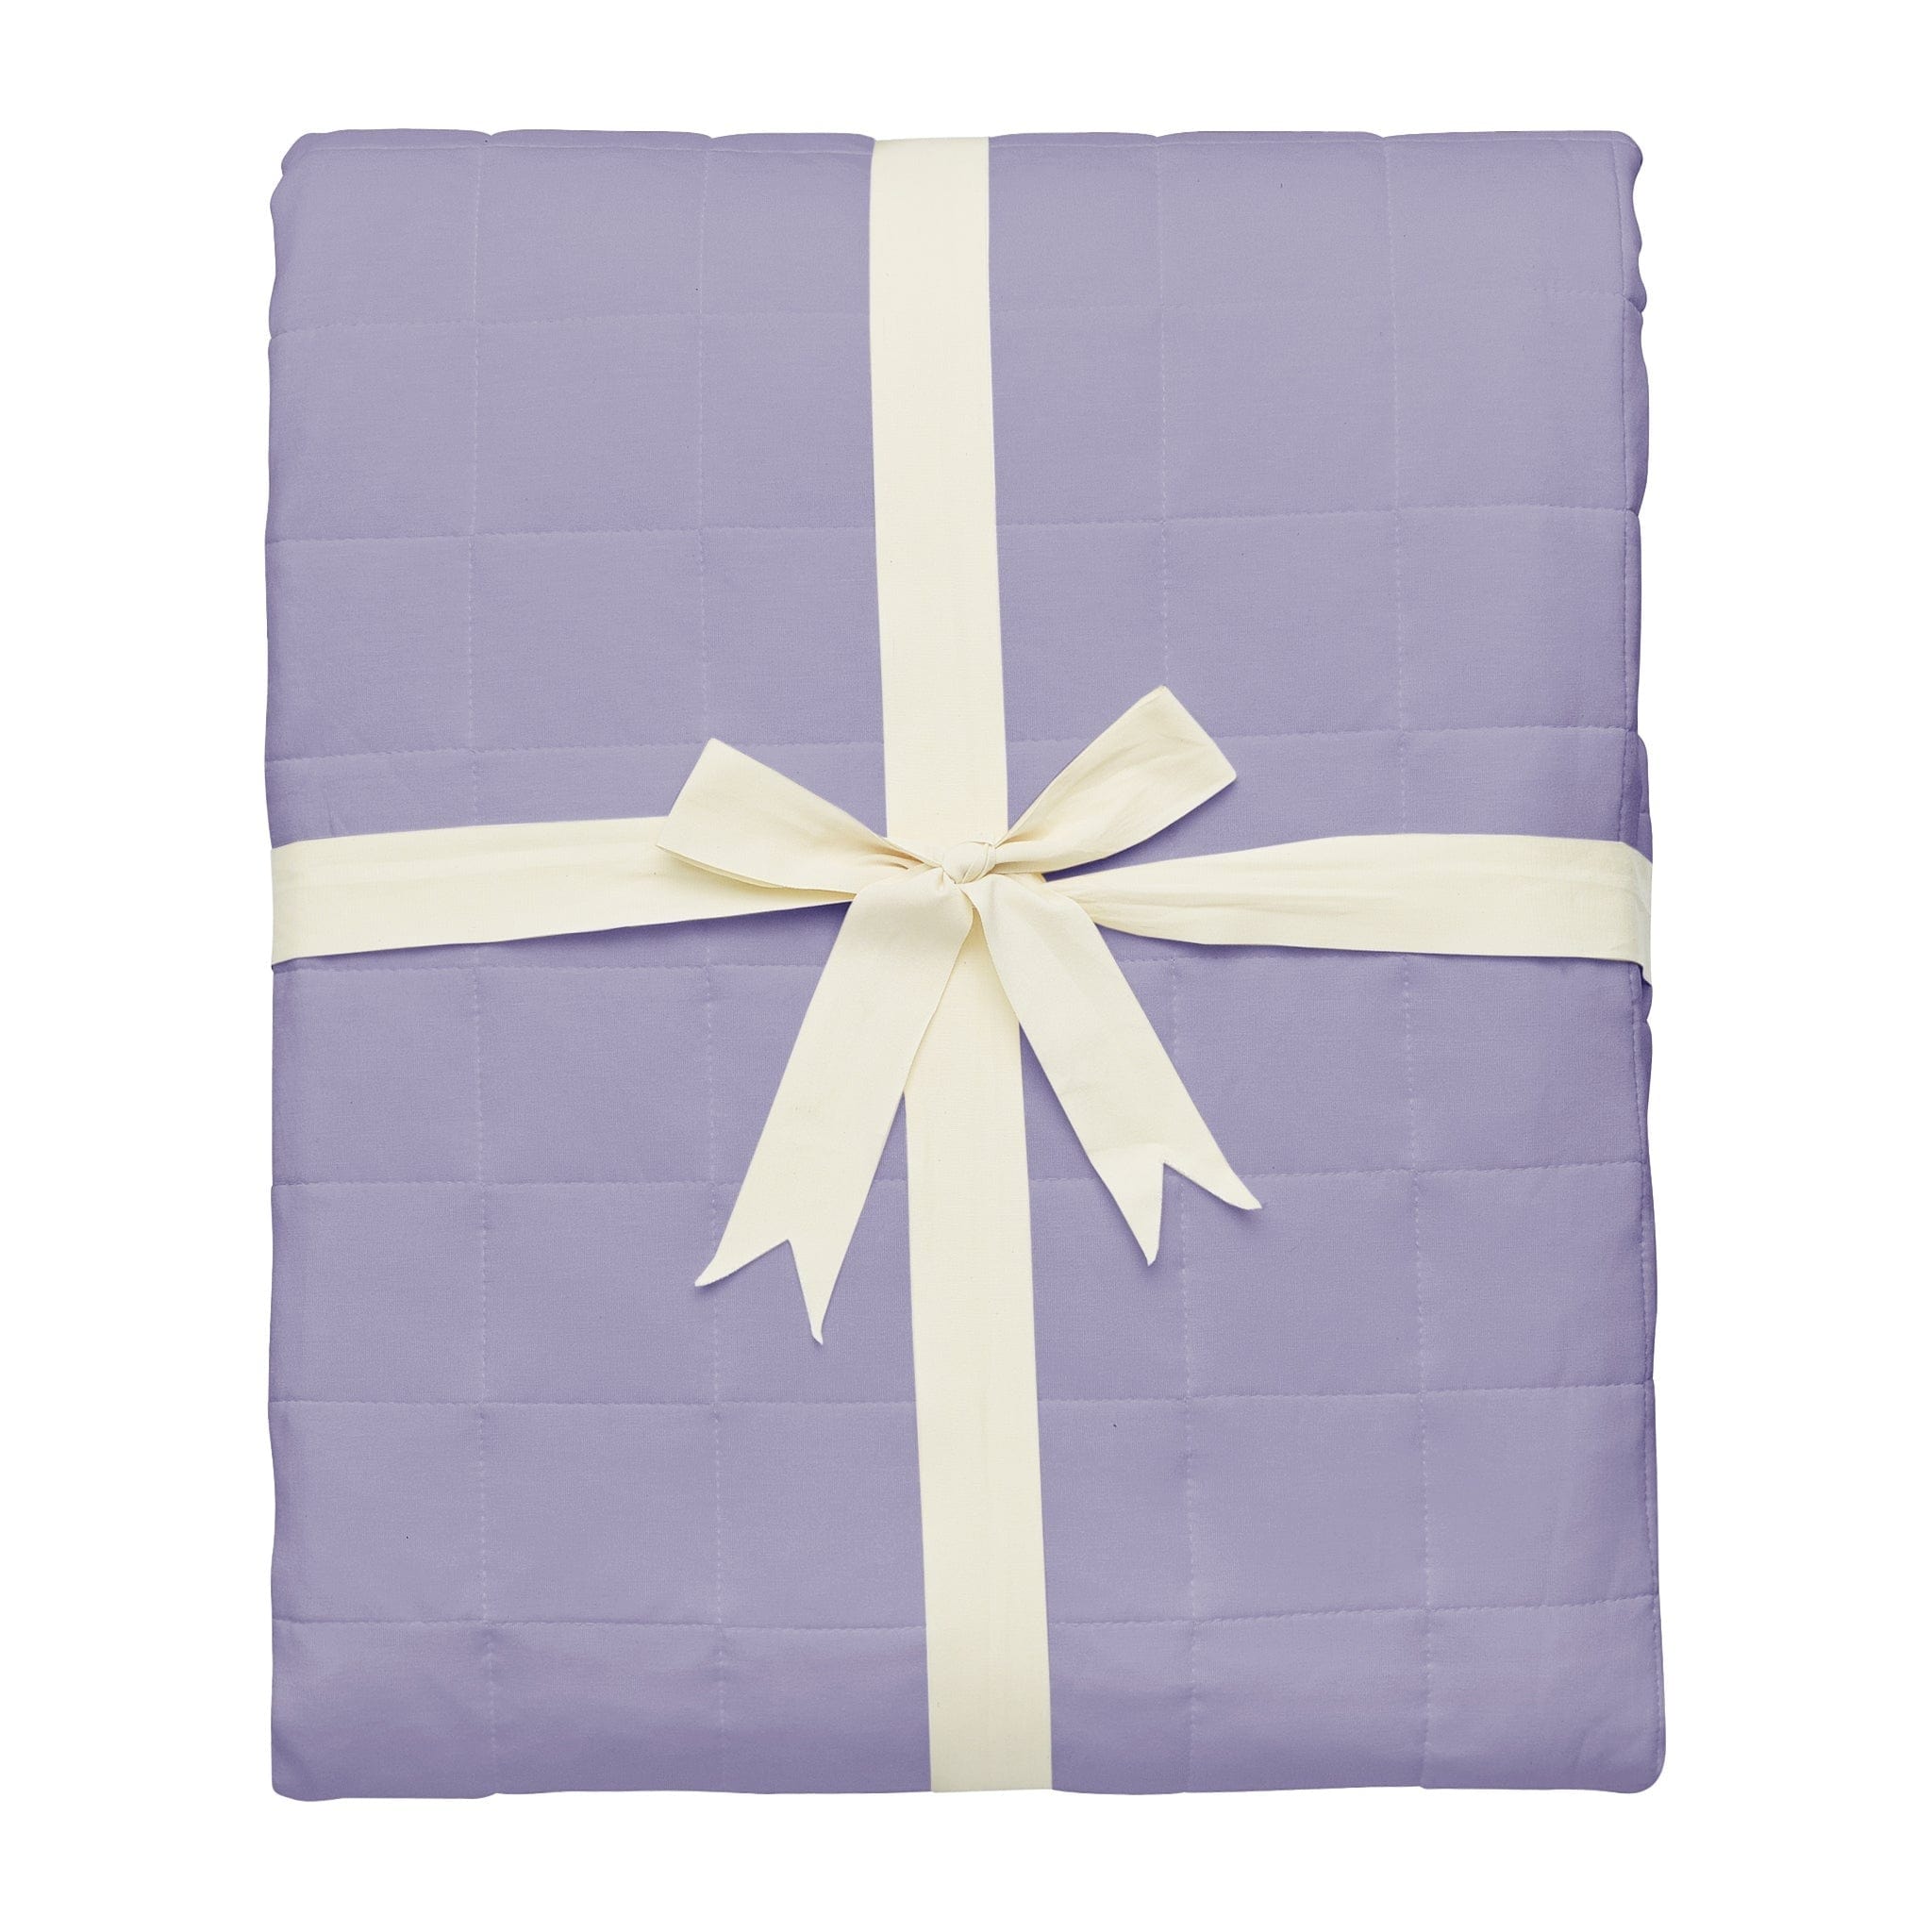 Kyte BABY Adult Blanket Taro / Adult Adult Quilted Blanket in Taro 2.5